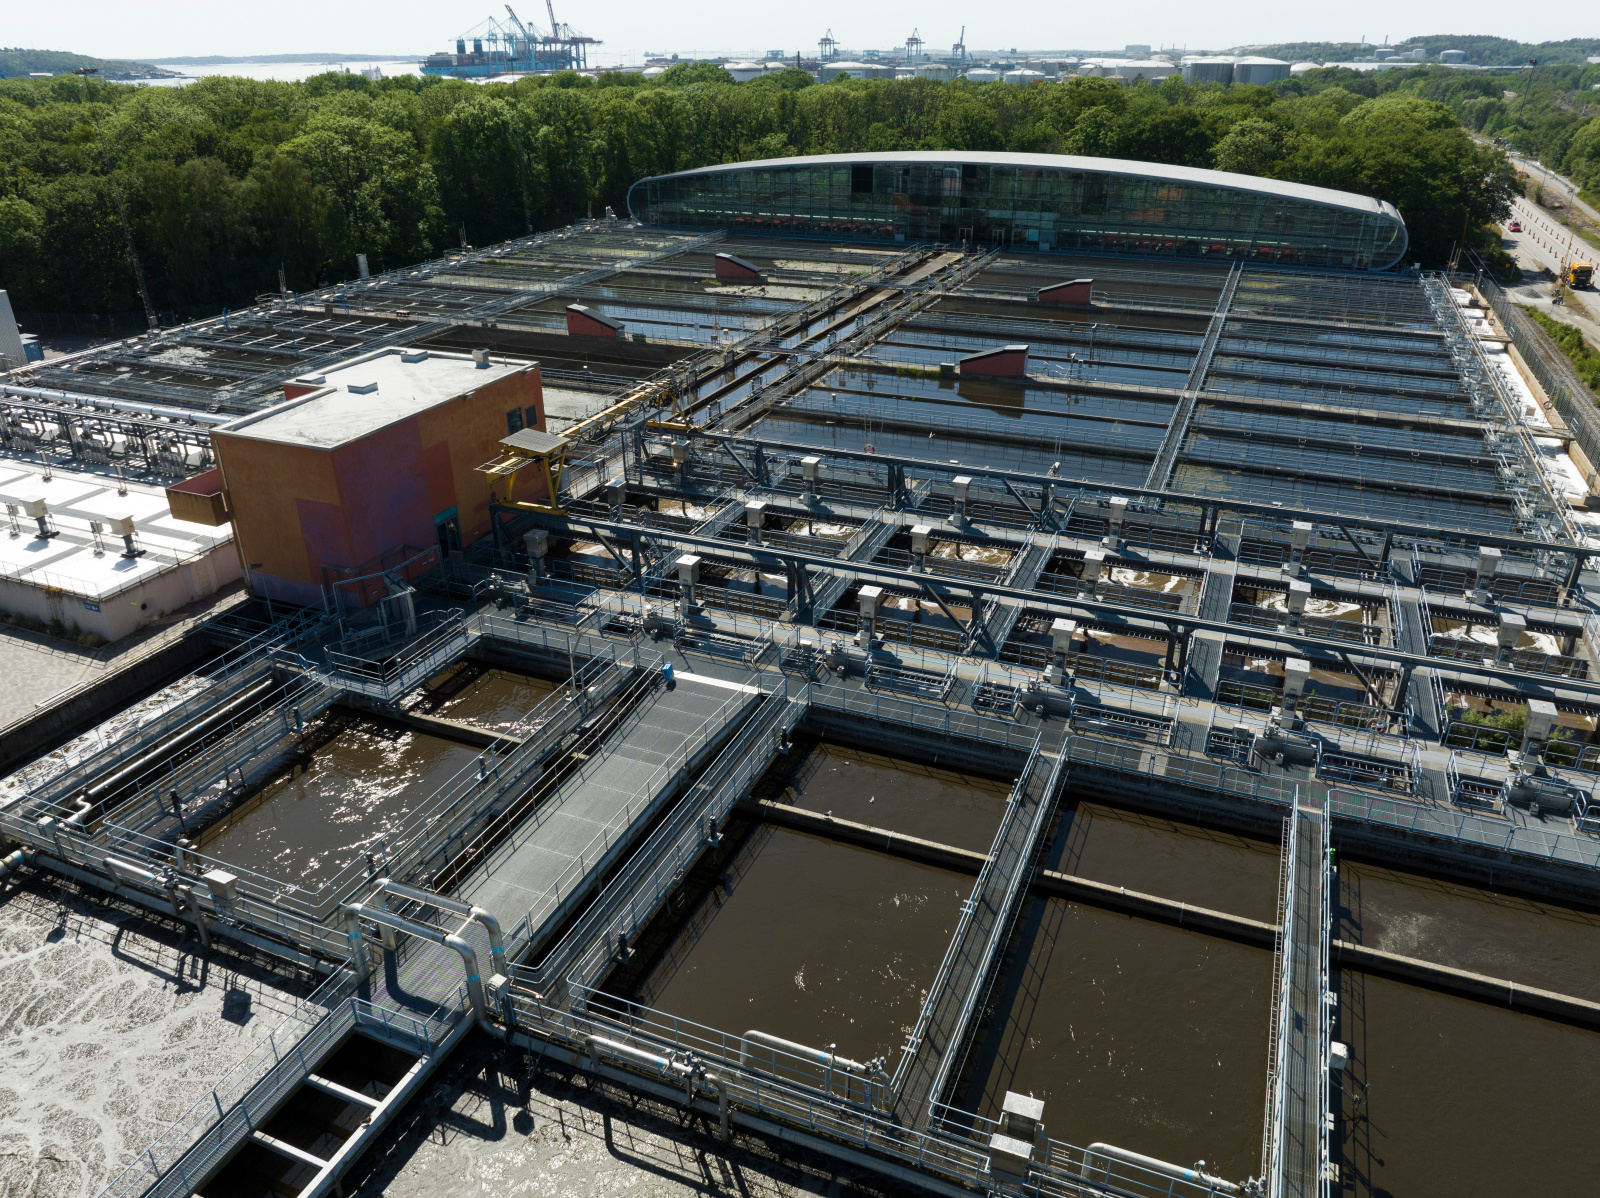 The wastewater treatment plant has an average inflow of 4’000 liters per second